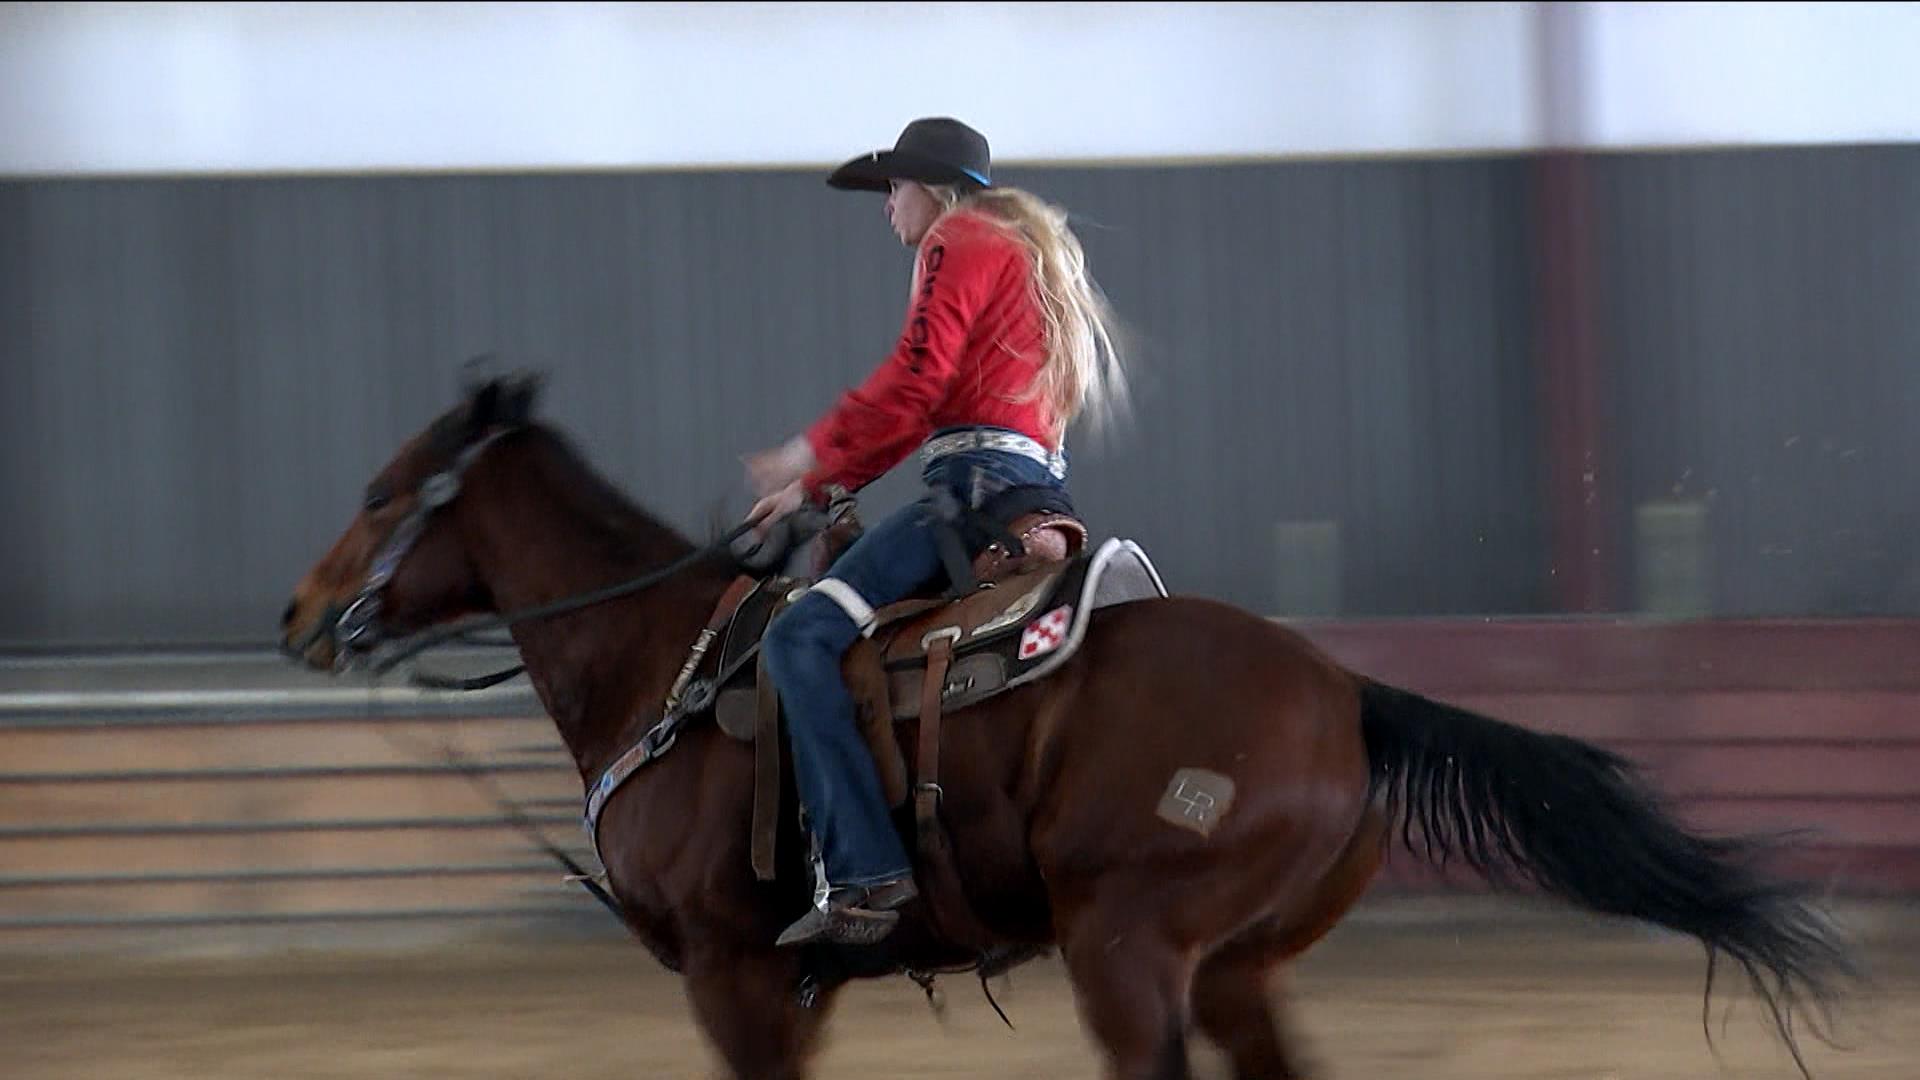 After an accident left her paralyzed, this rodeo champion is back in the sa...